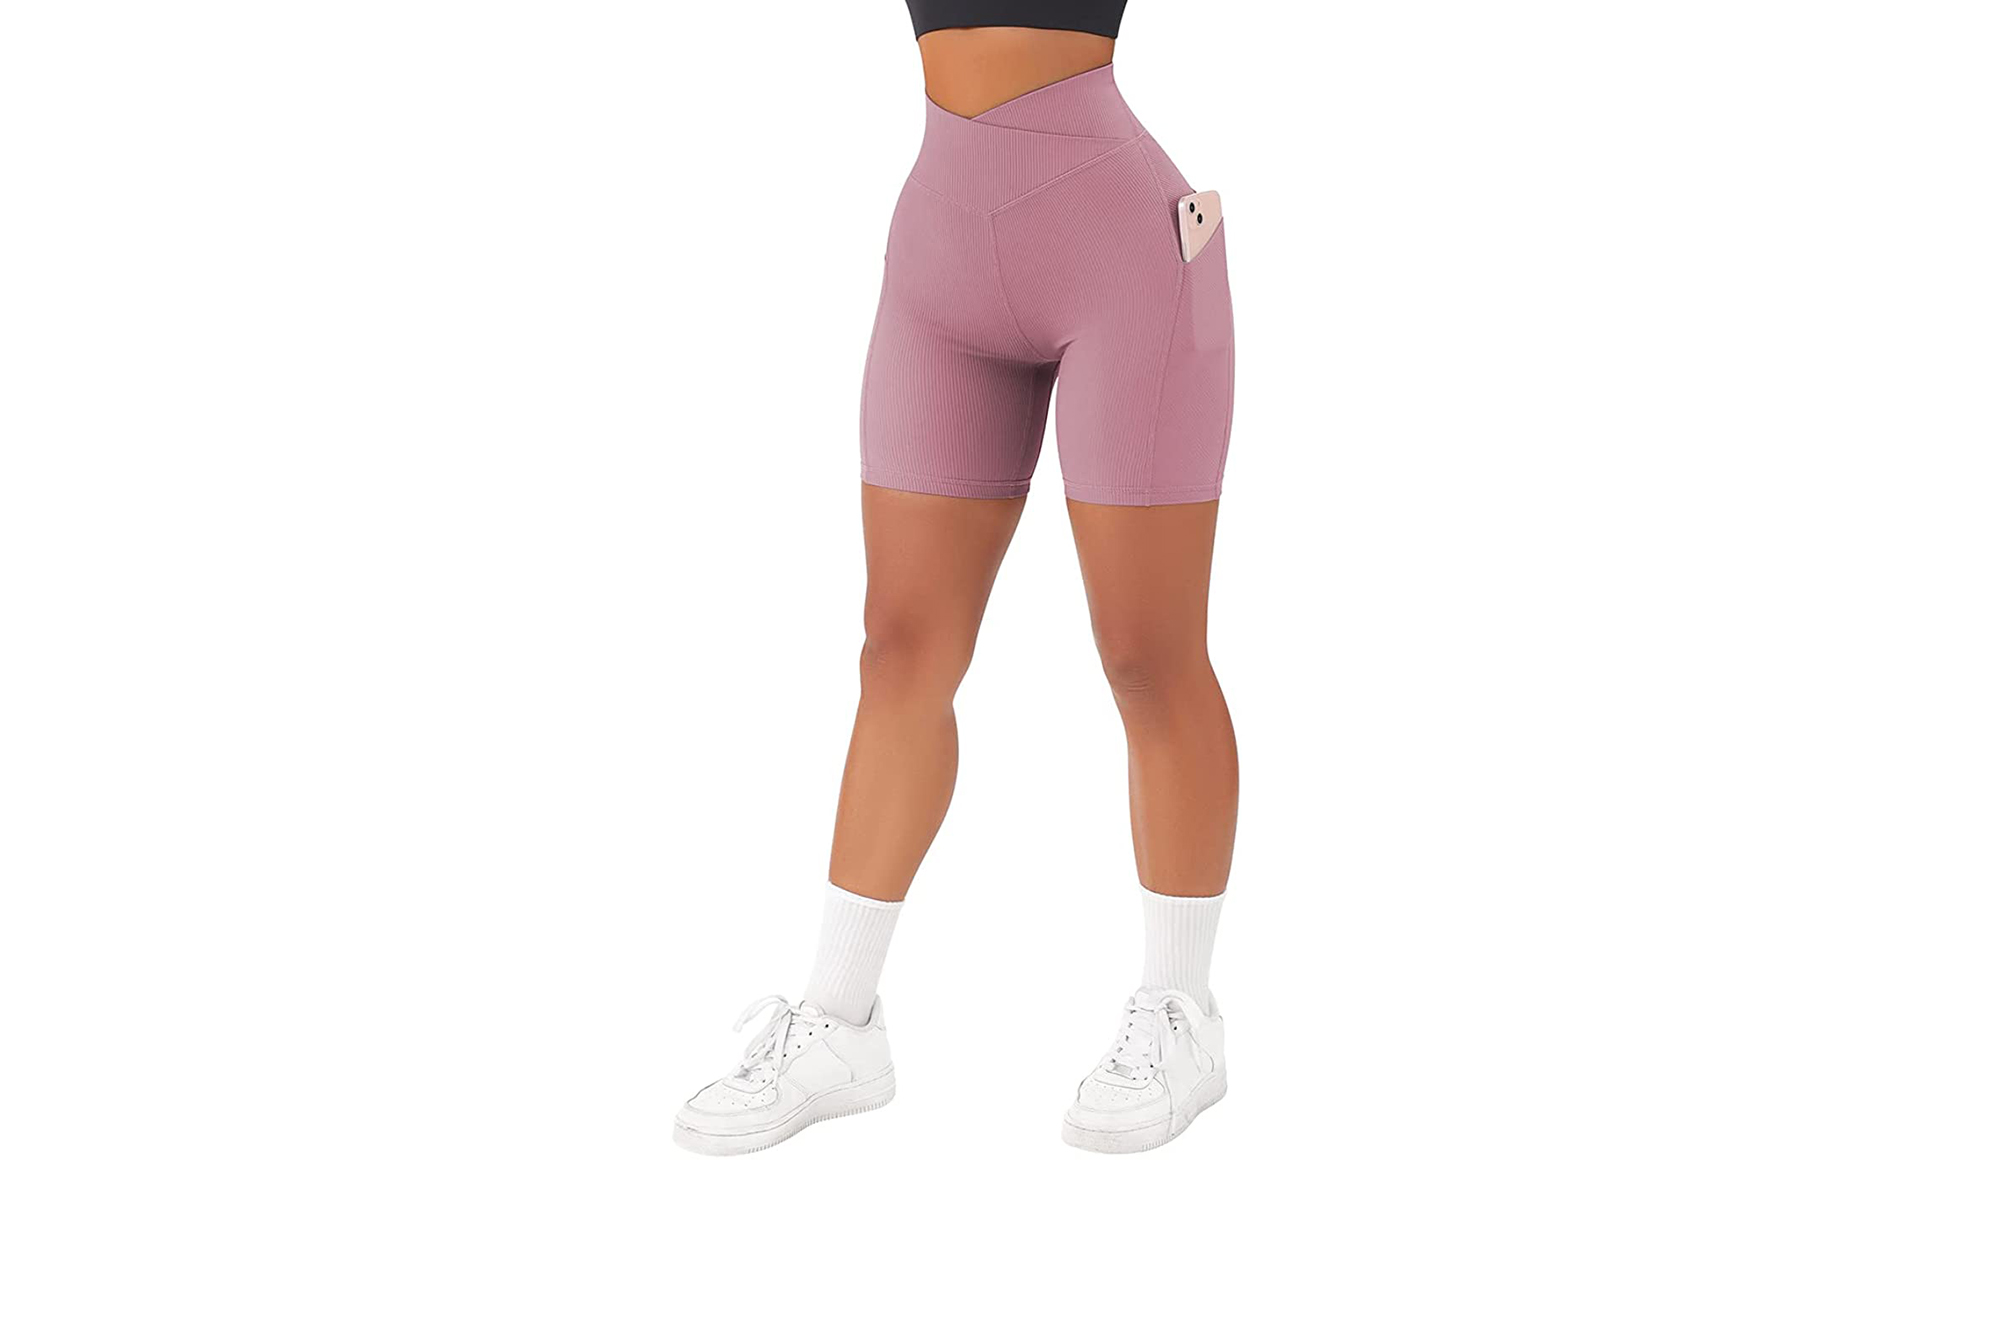 These High-Waisted Workout Shorts Lift Your Booty and Cinch Your